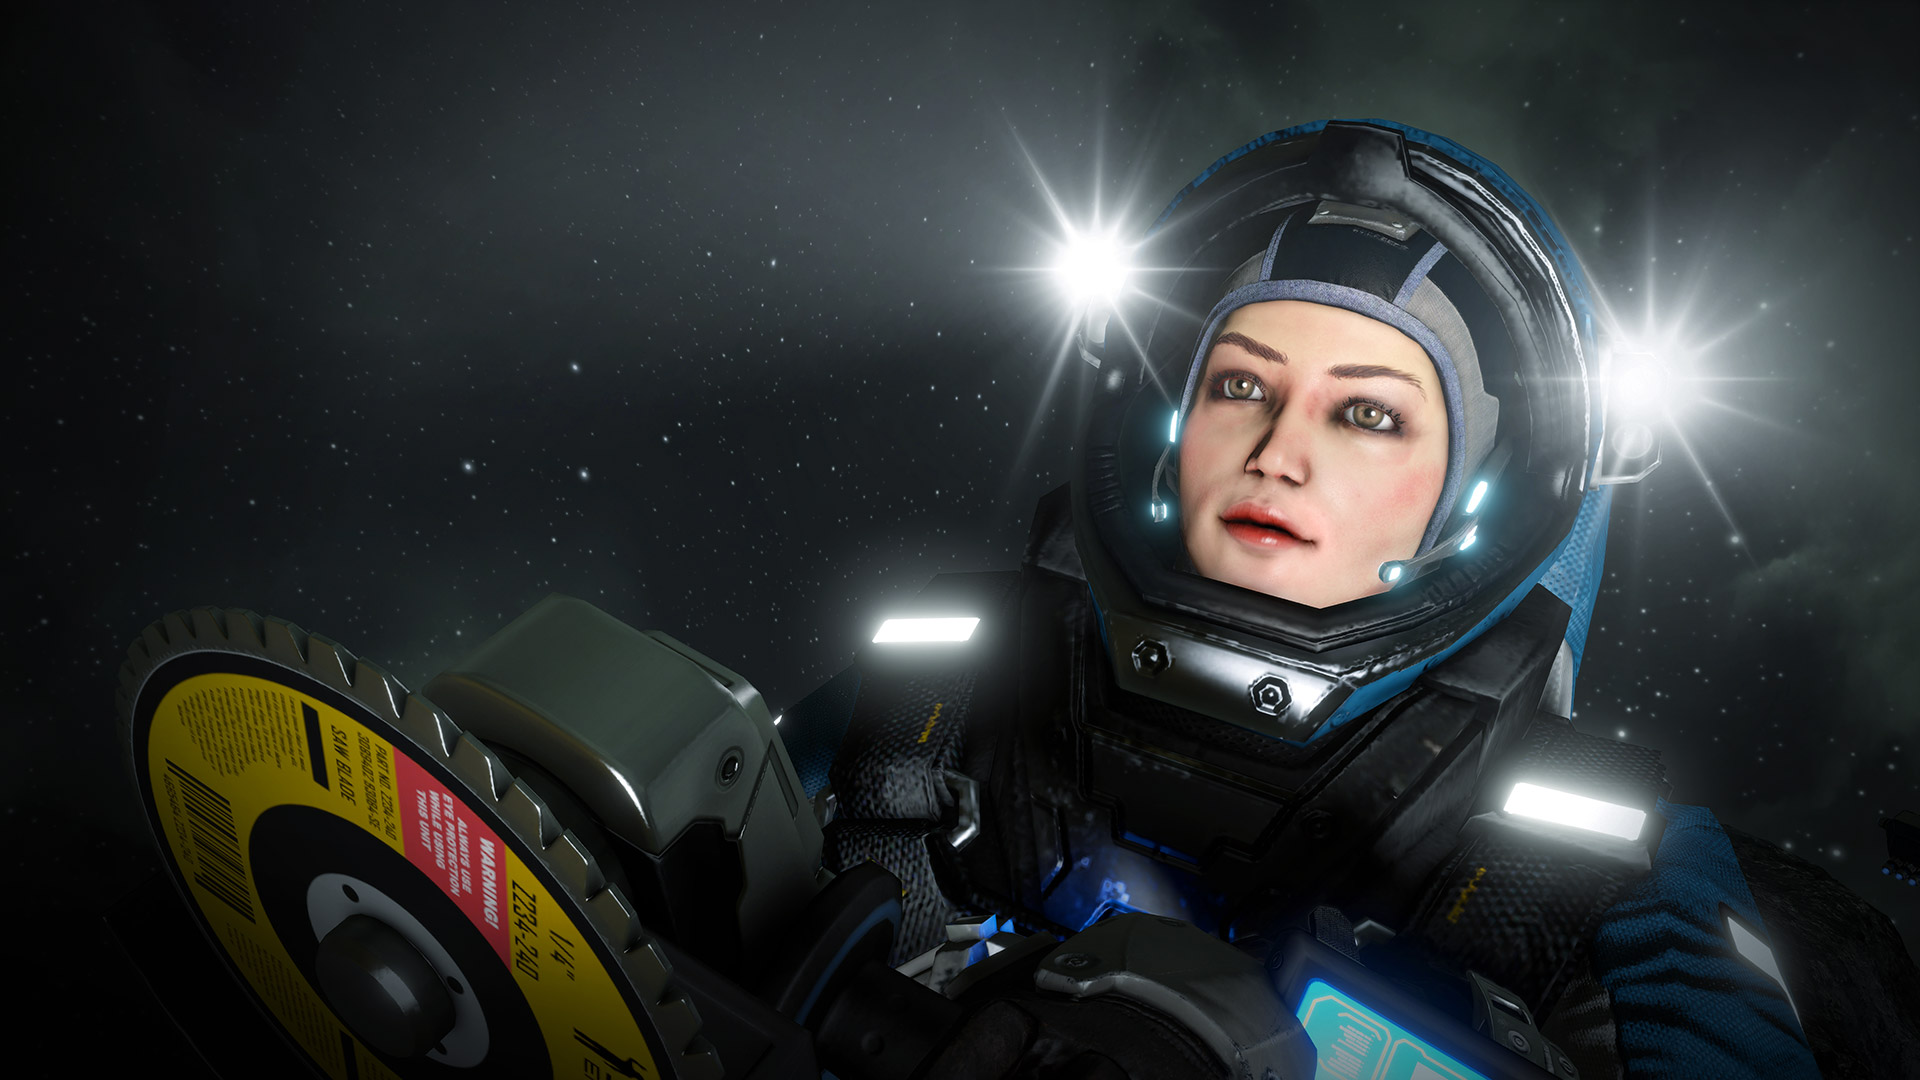 HD desktop wallpaper featuring a space engineer with a futuristic suit and helmet against a starry background.